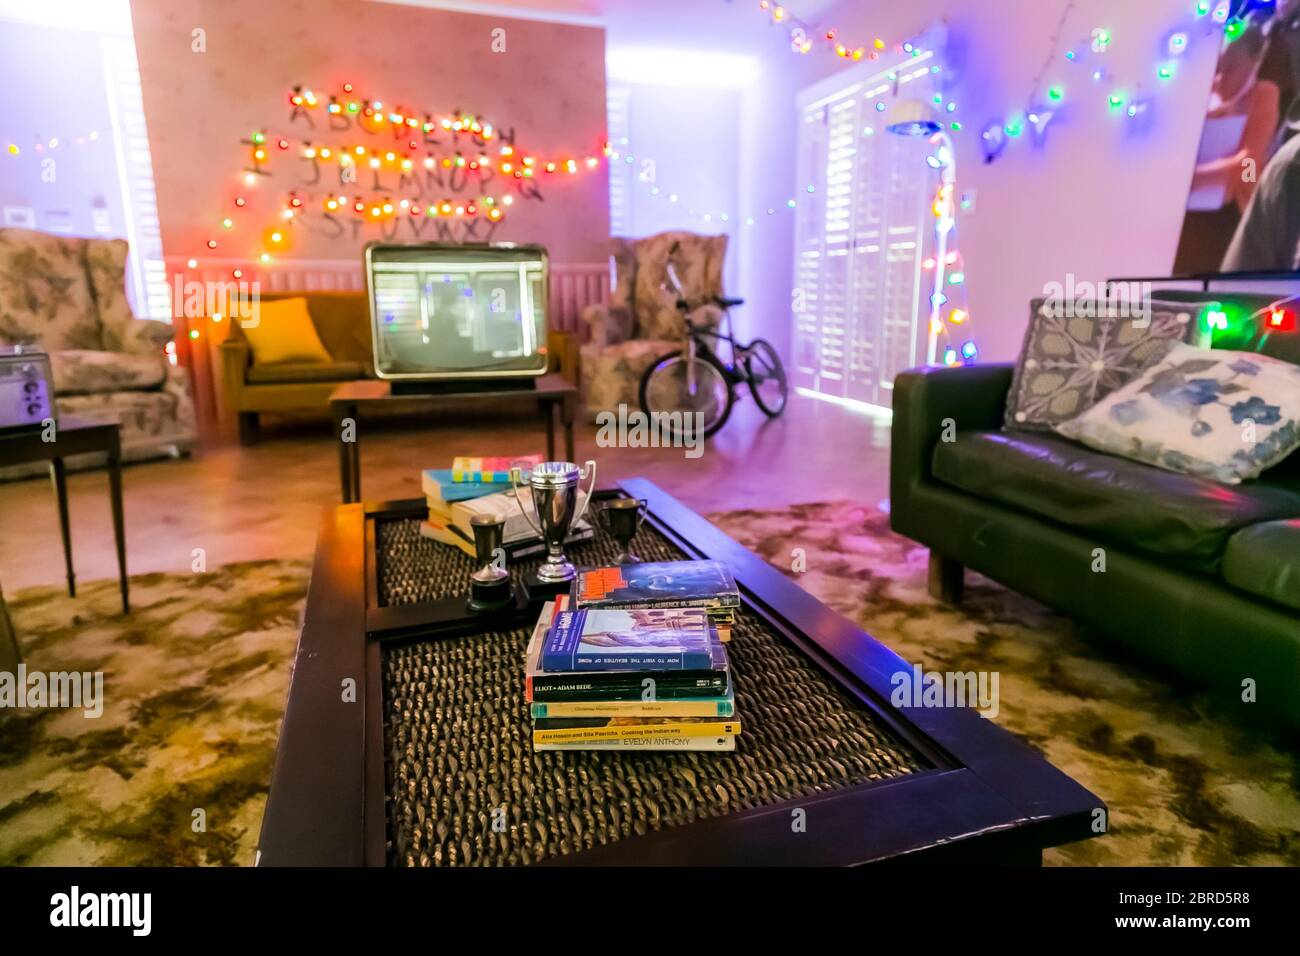 Johannesburg, South Africa - October 19, 2017: Inside Interior of a home lounge with Stranger Things and Netflix branded cushions and decor Stock Photo